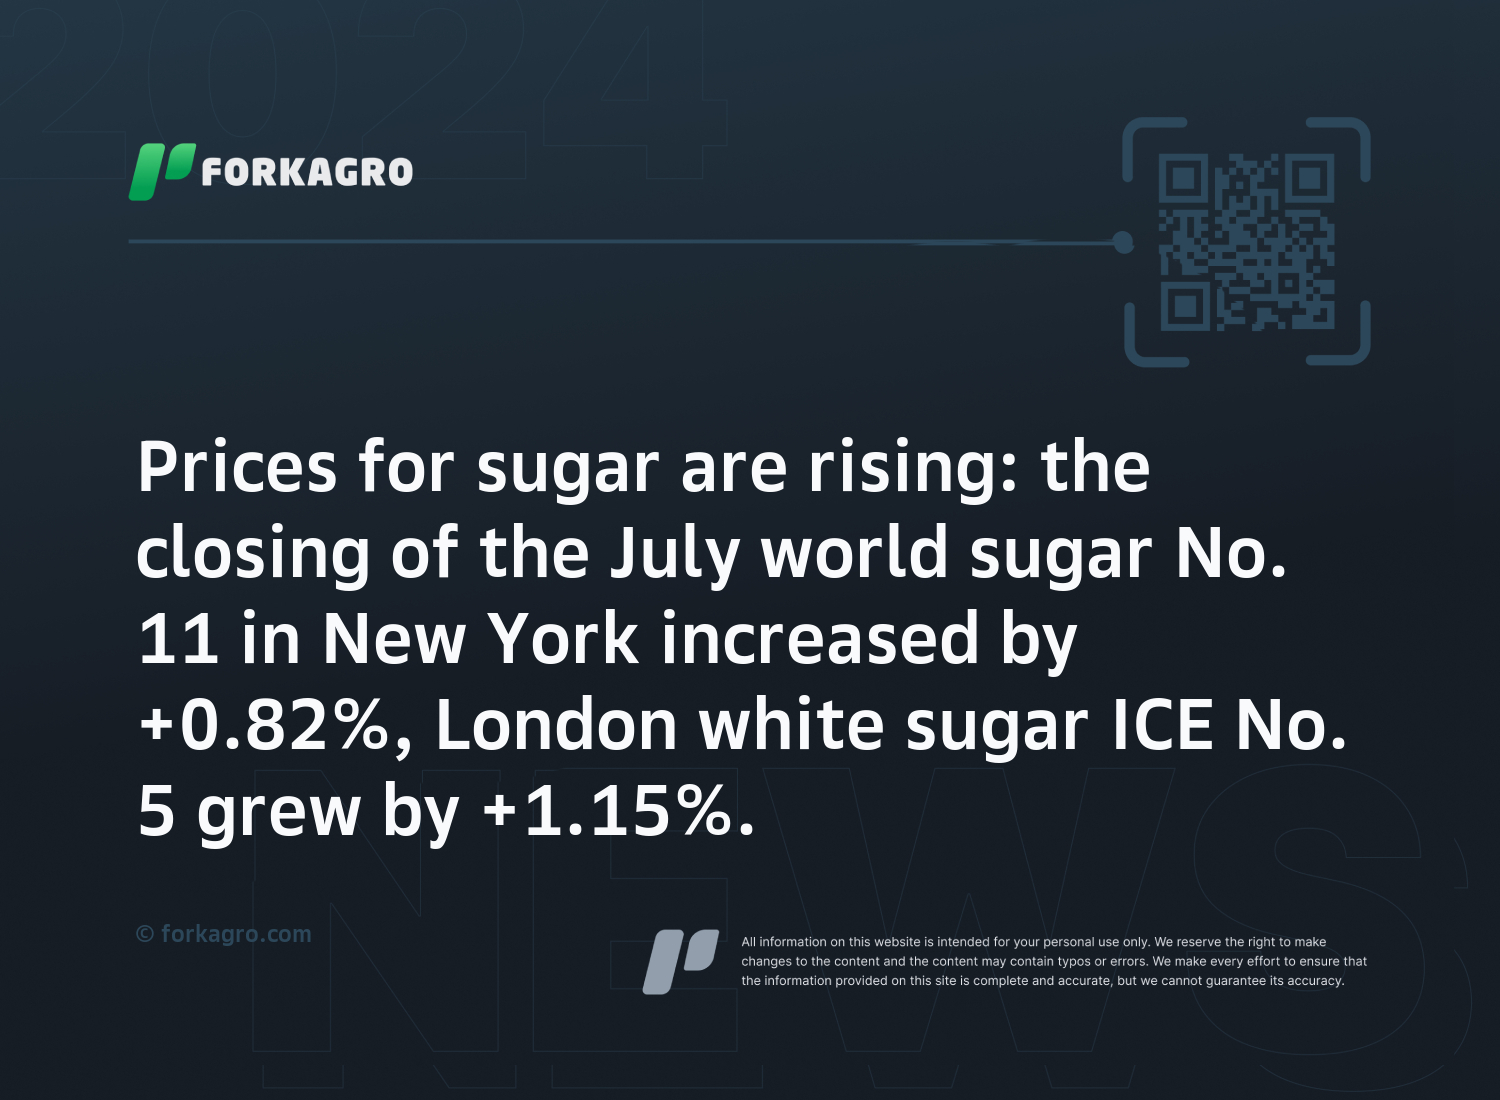 Prices for sugar are rising: the closing of the July world sugar No. 11 in New York increased by +0.82%, London white sugar ICE No. 5 grew by +1.15%.